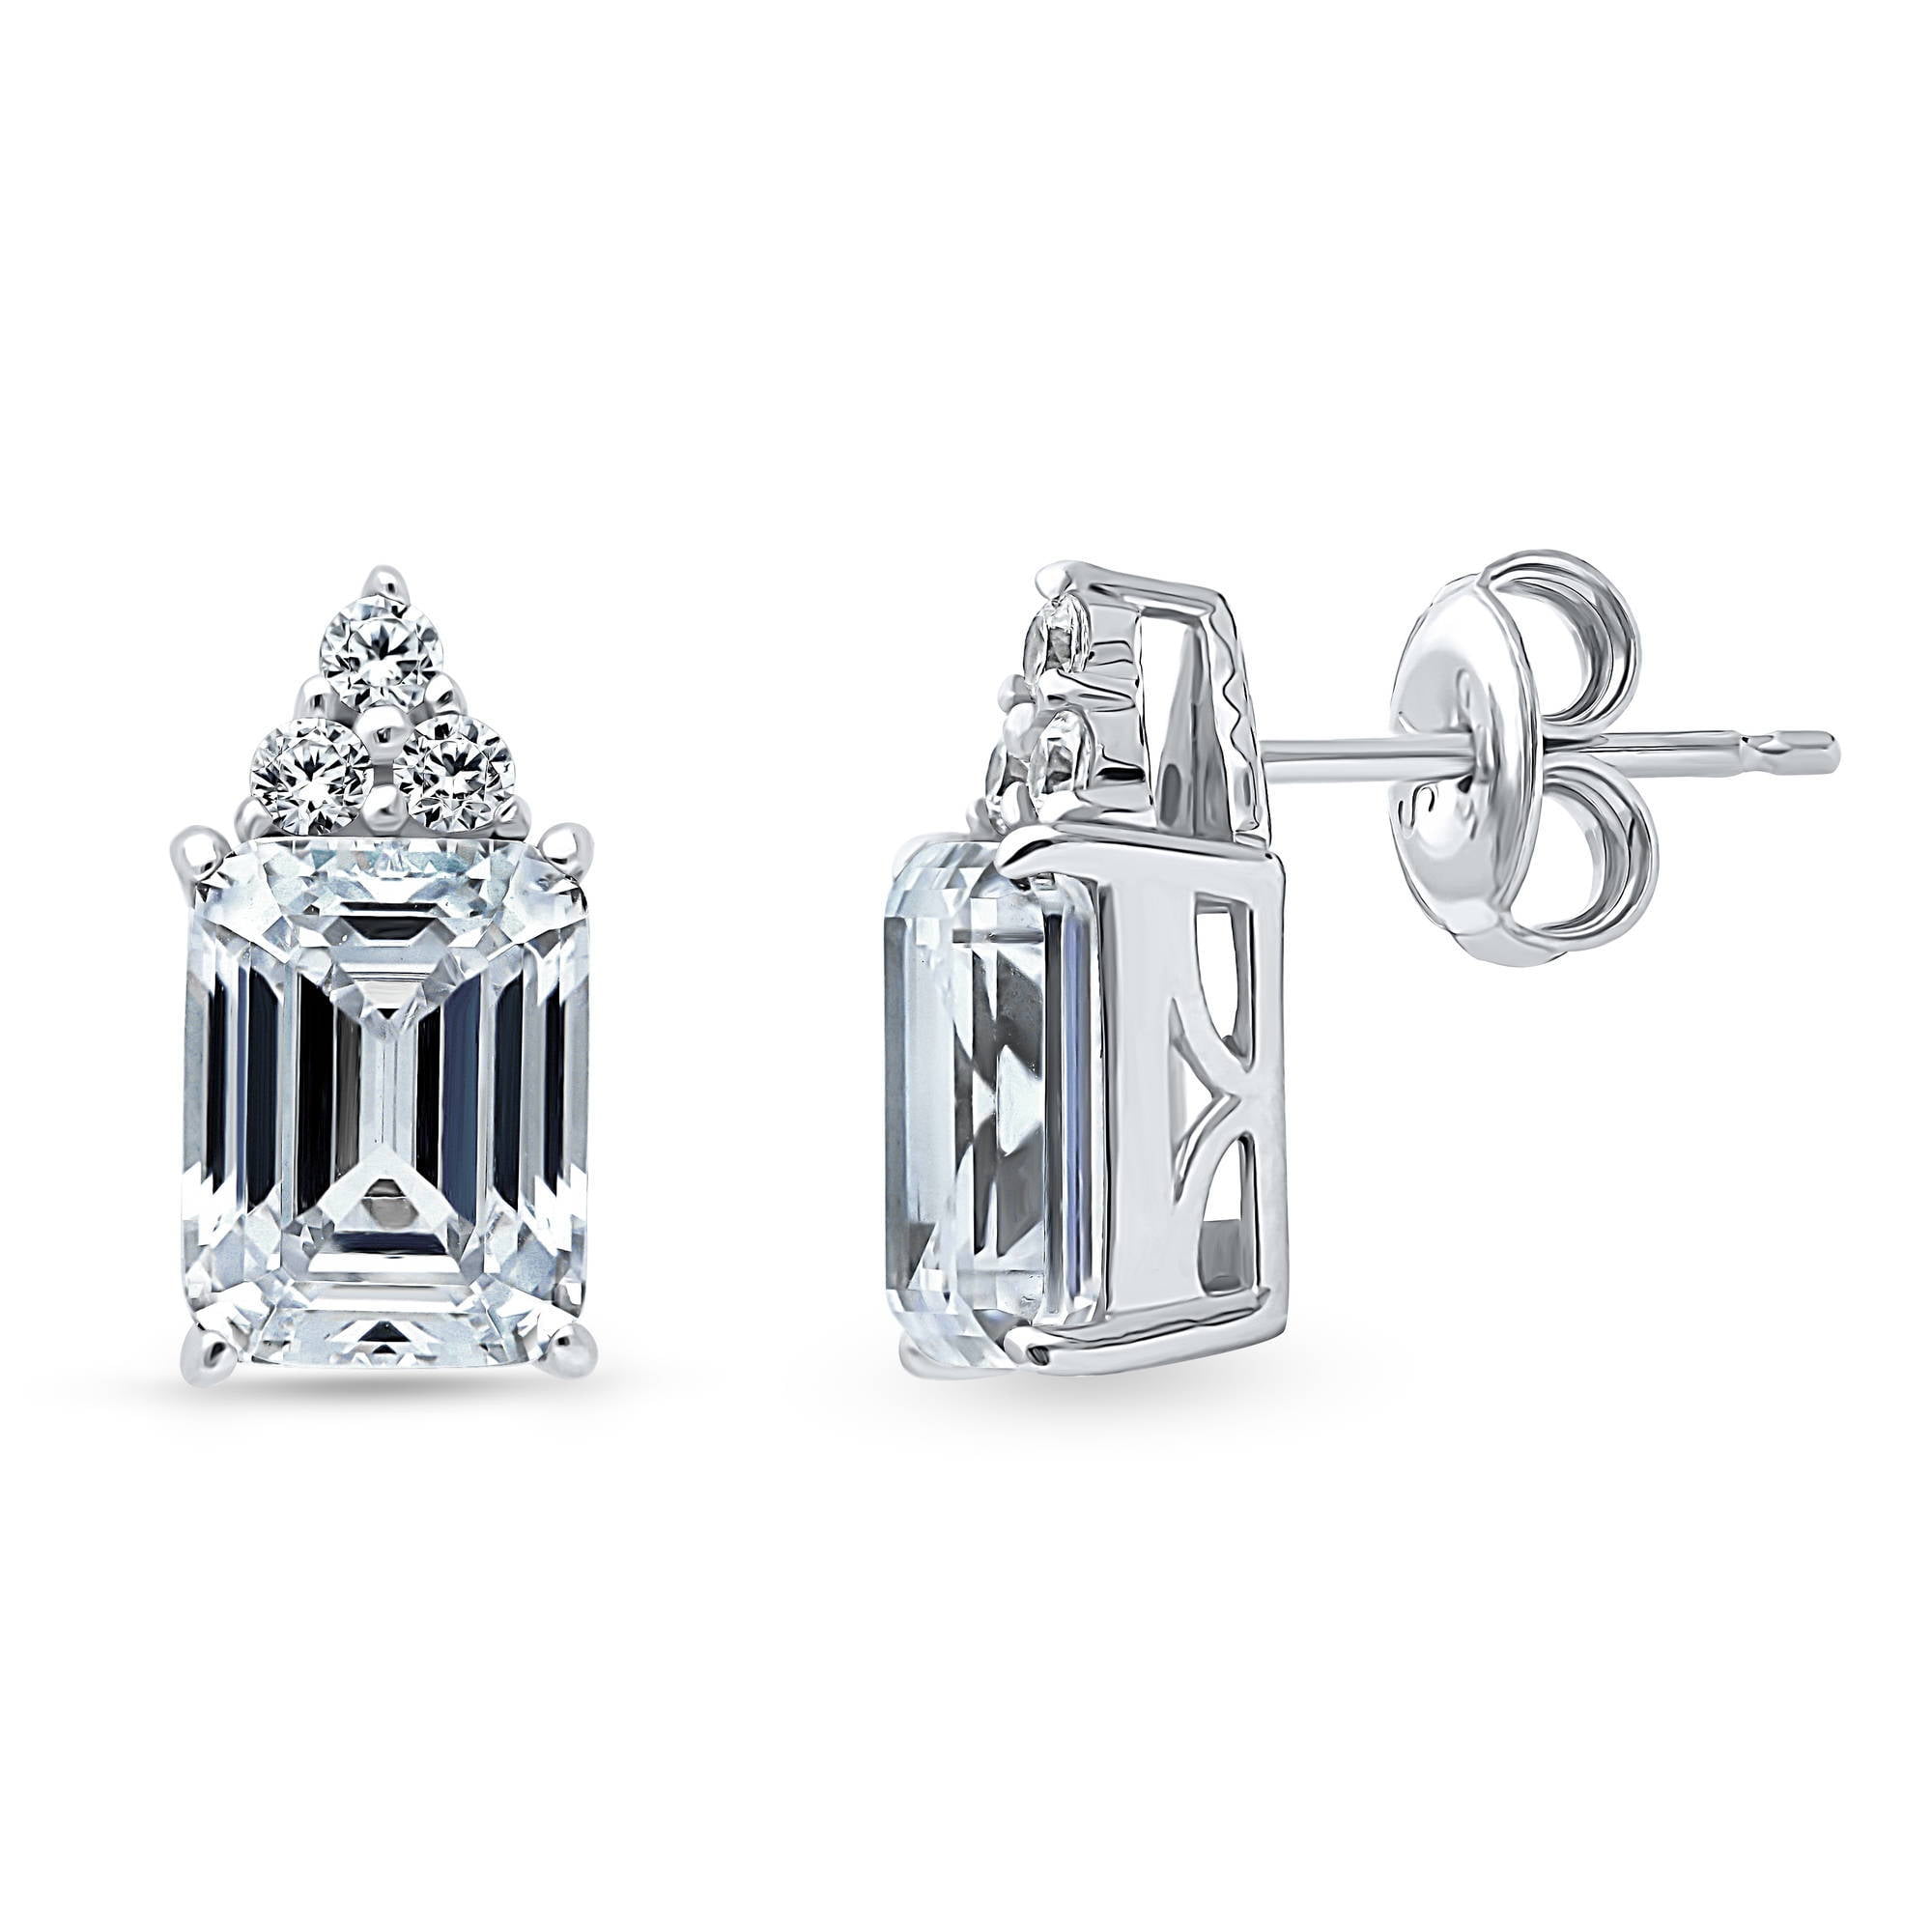 BERRICLE Rhodium Plated Sterling Silver Emerald Cut Cubic Zirconia CZ Solitaire Anniversary Fashion Stud Earrings 